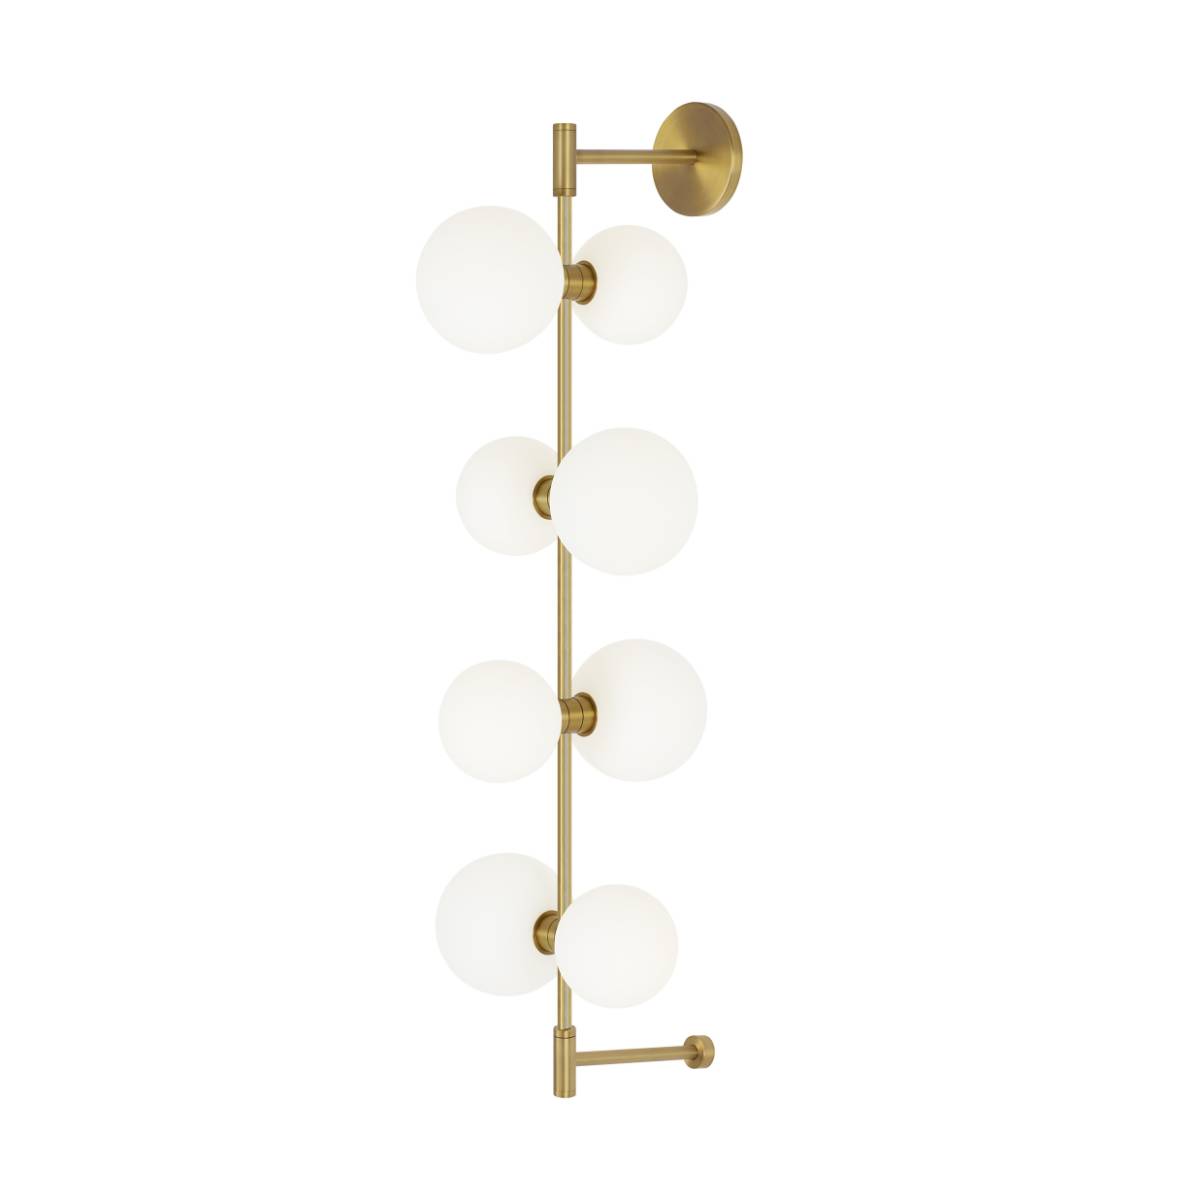 Modern Rail 36 inLED Armed Sconce Remote Conopy 1405 Lumens 3000k Brass Finish